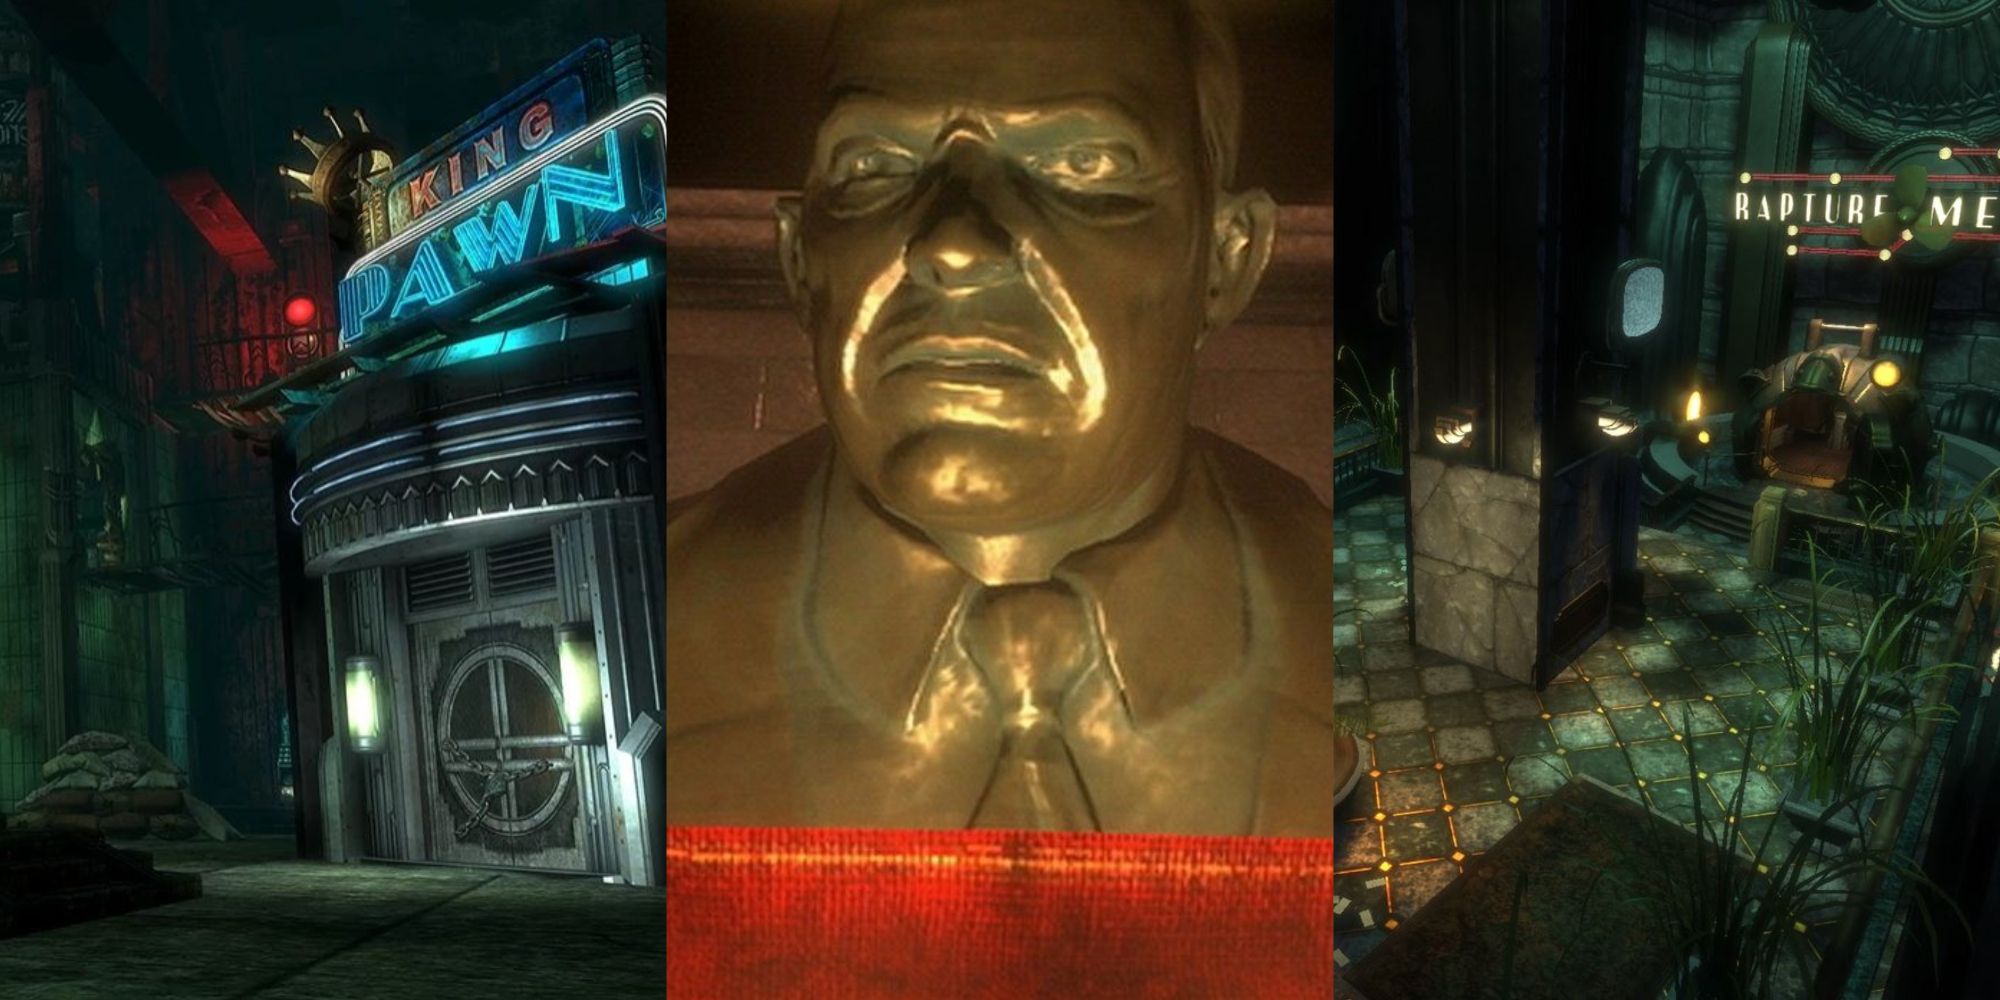 Pauper's Drop, Andrew Ryan statue, and Rapture Metro lobby in BioShock 1 and 2